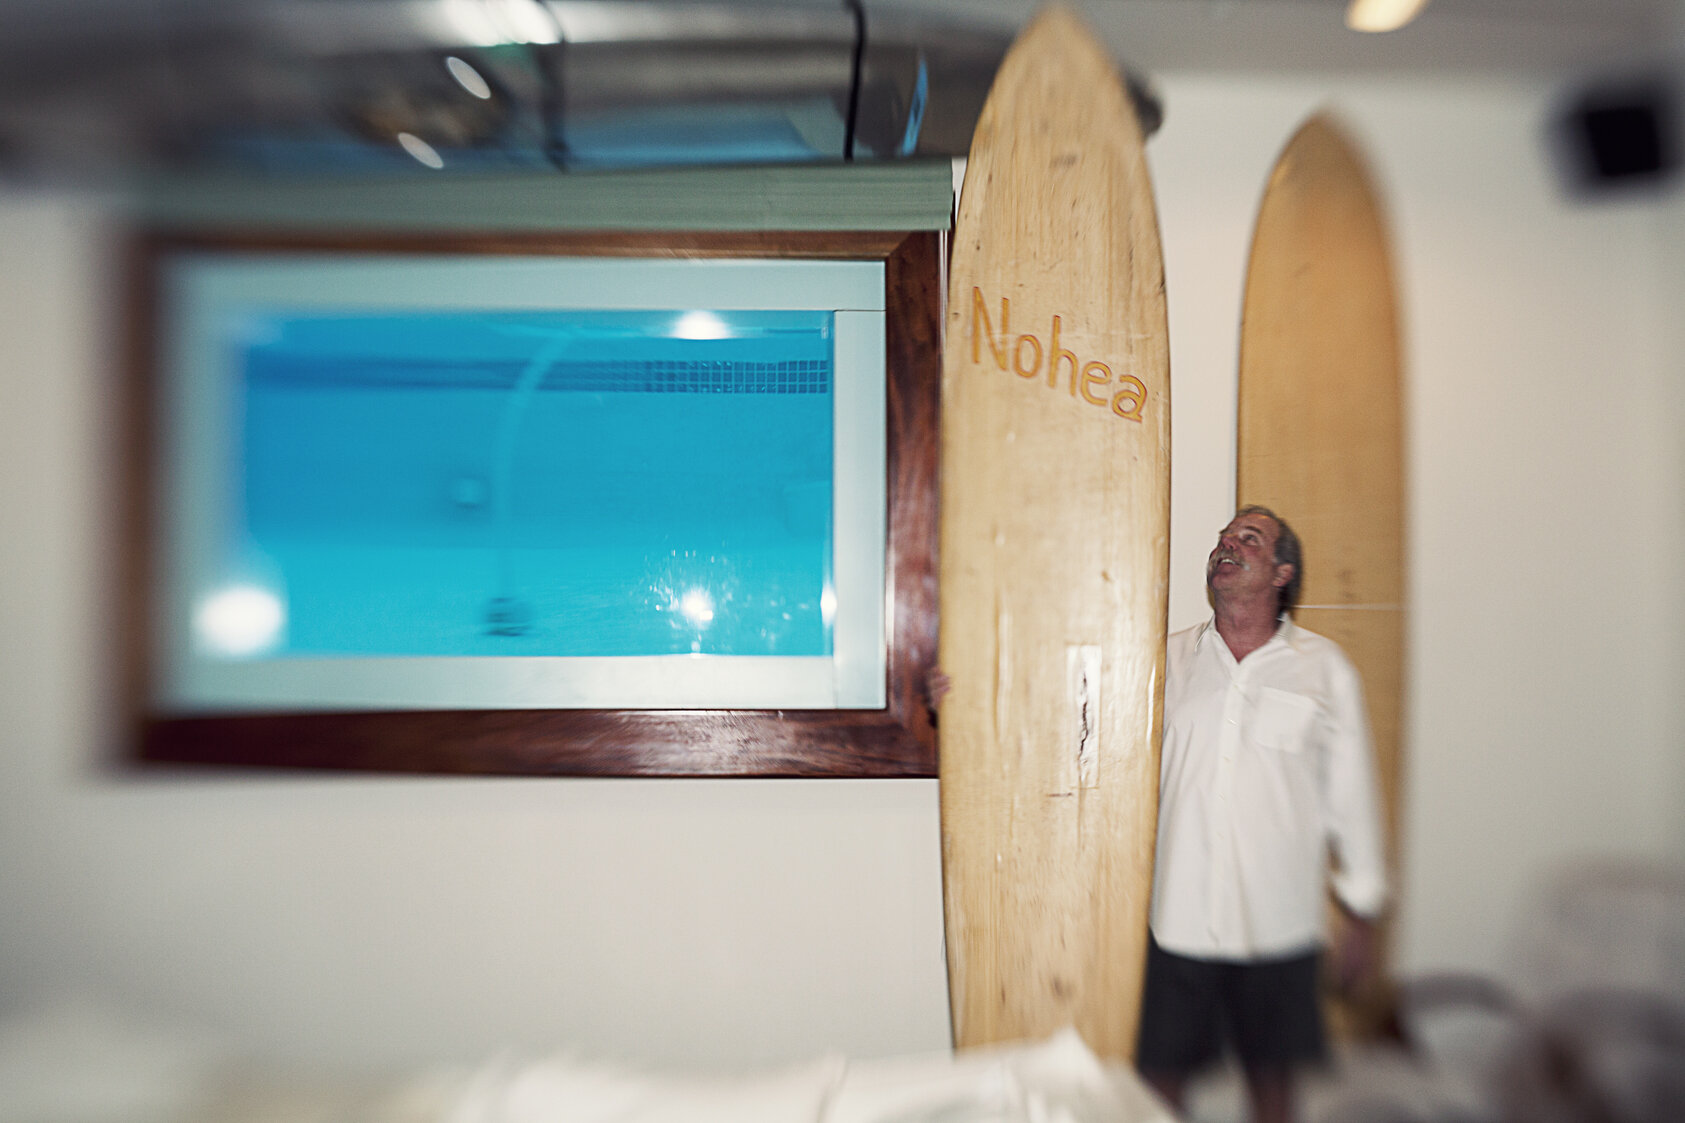  Griff Snyder RIP (19?? - 2018) Griff was one of the original surfboard and memorabilia collectors. This is  he with some of his collectible surfboards, in front of the window that looks into his swimming pool. Cool! 